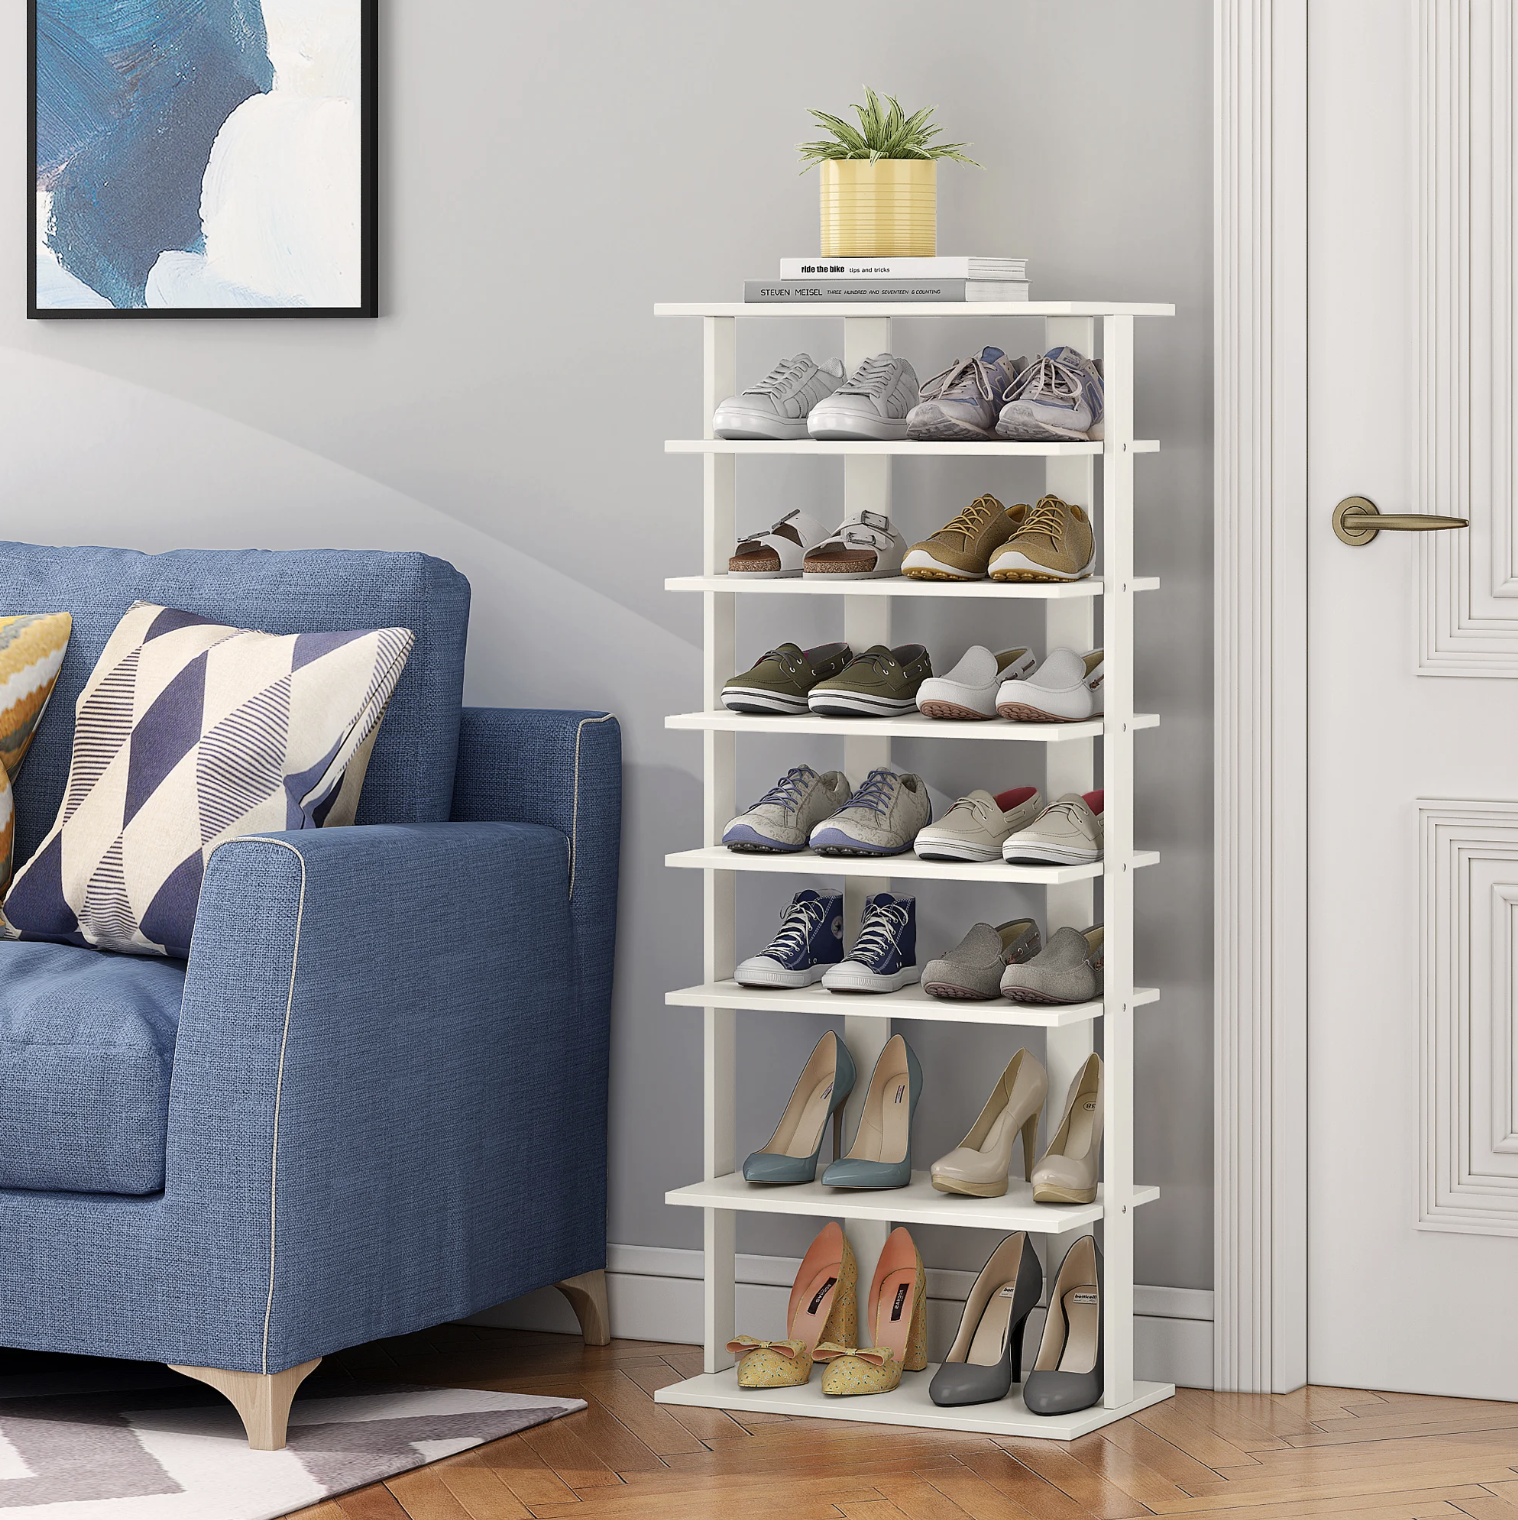 The filled shoe rack next to a couch